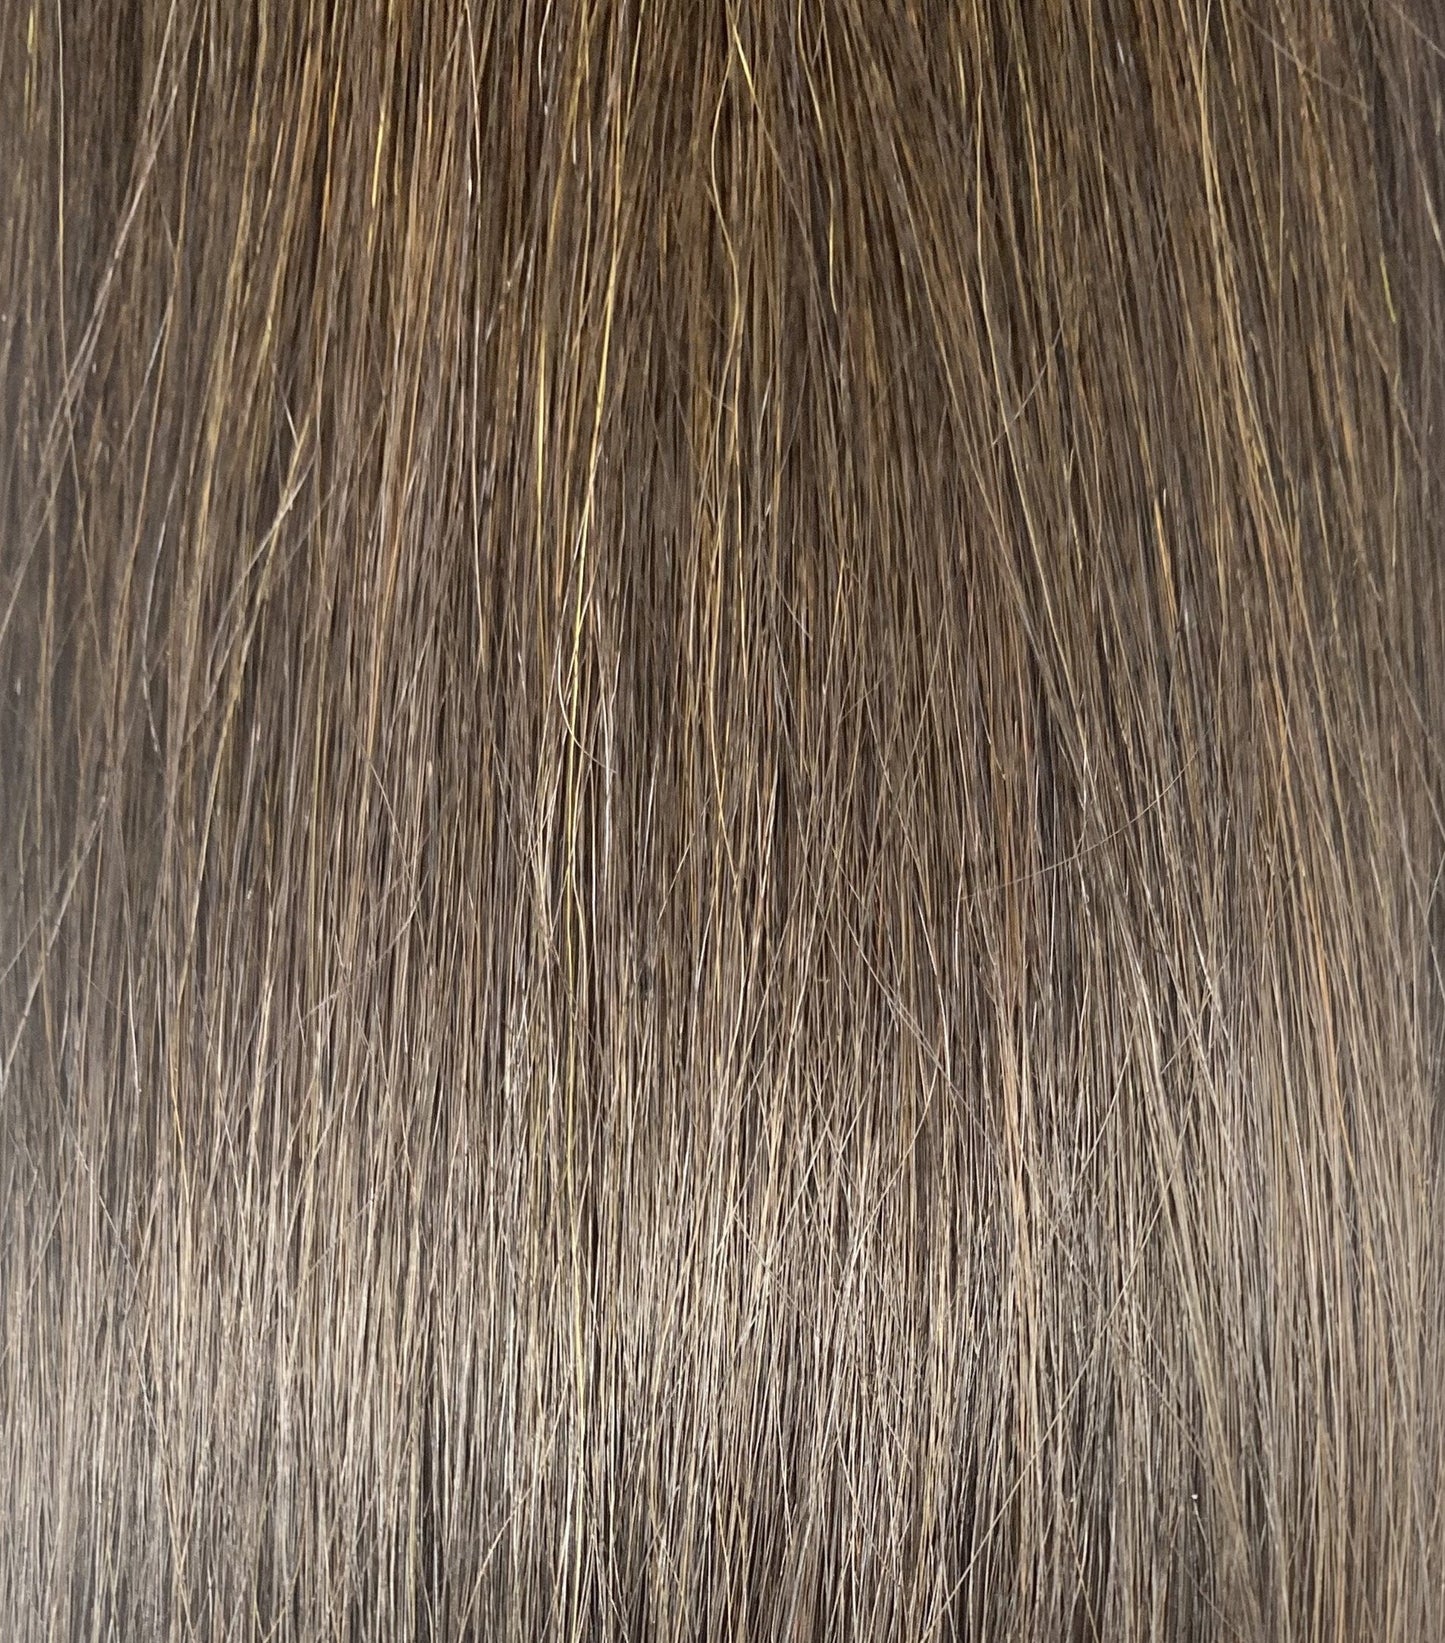 Weft hair extensions #2 - Double - 24 inches - Chestnut Brown Weft DR Hair Products Co 